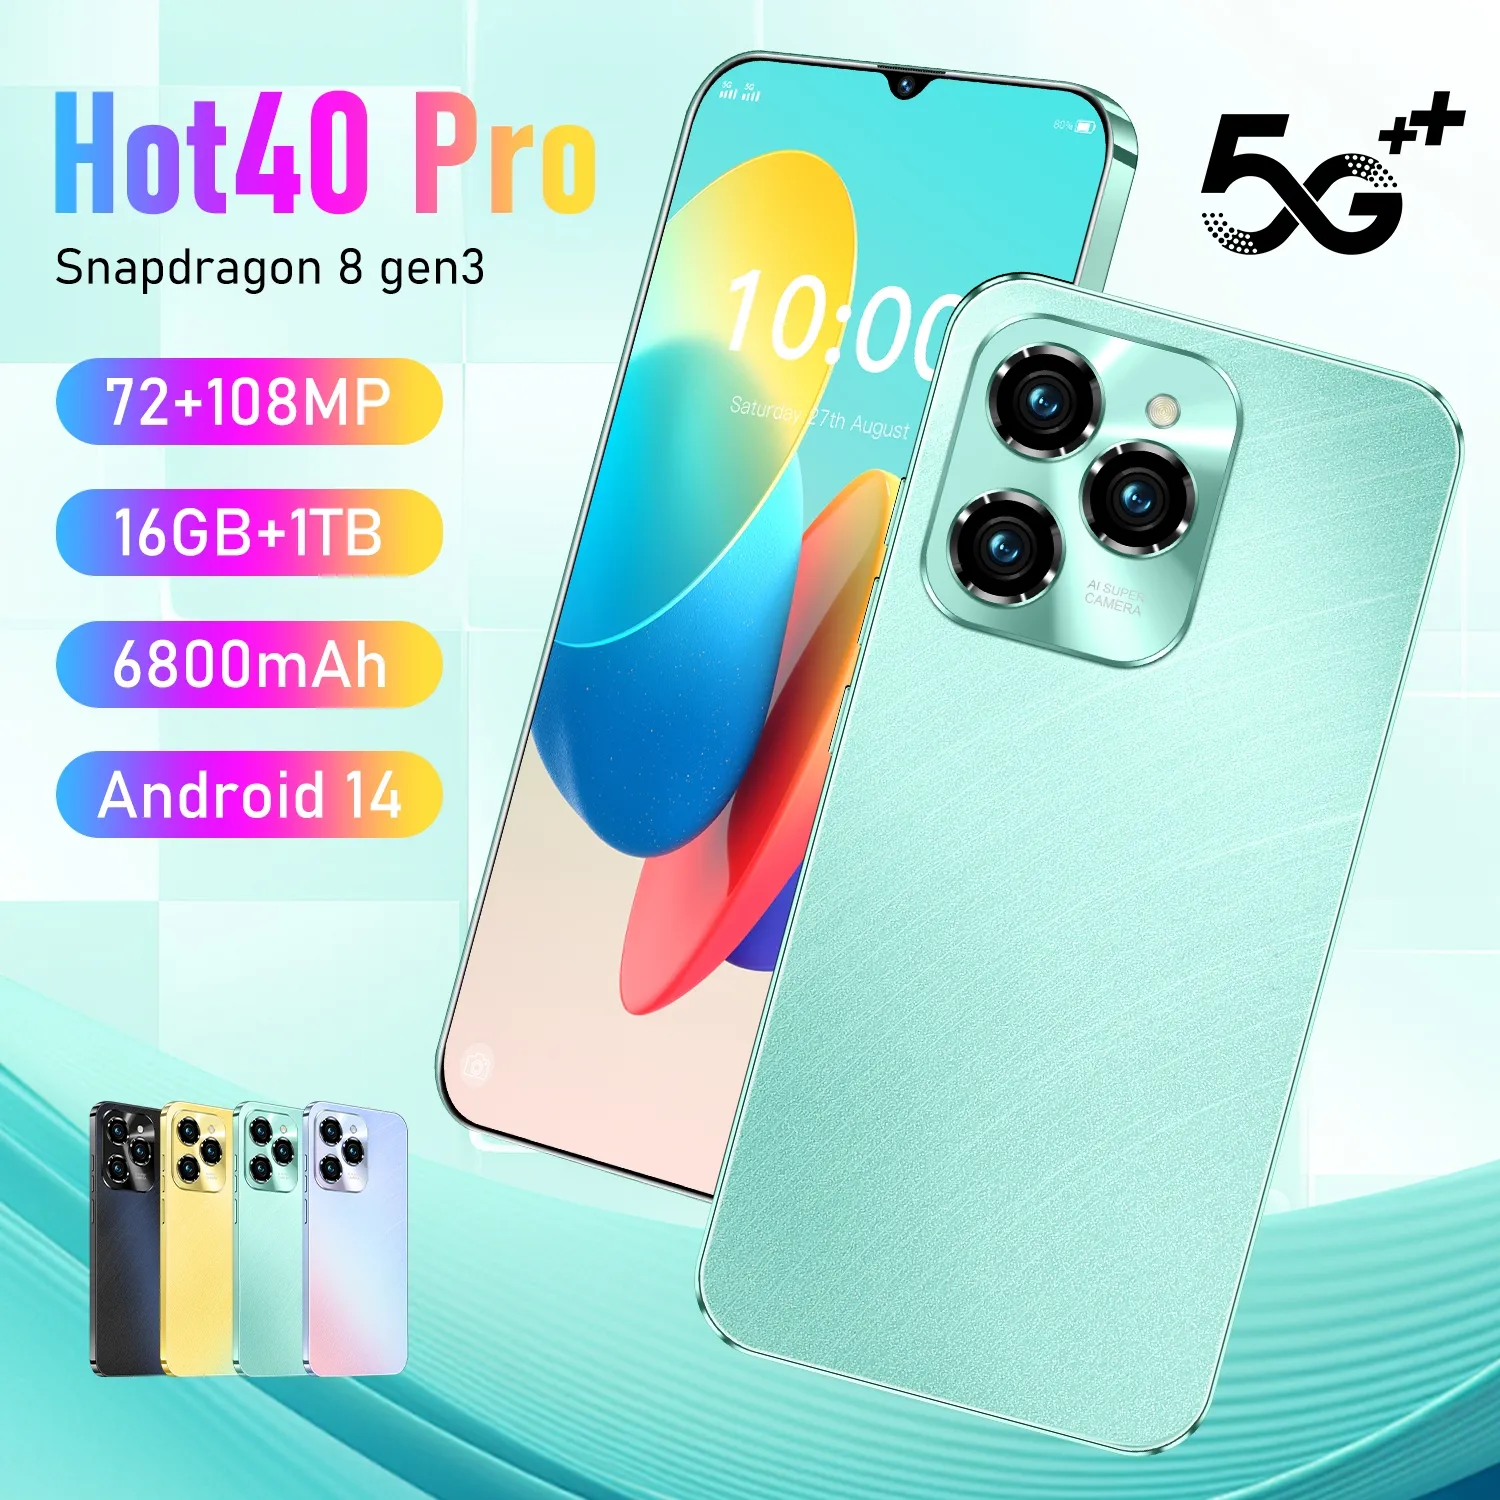 5g smartphone mobile bags & cases Hot 40 pro rog phone 7 ultimate tecno camon 20